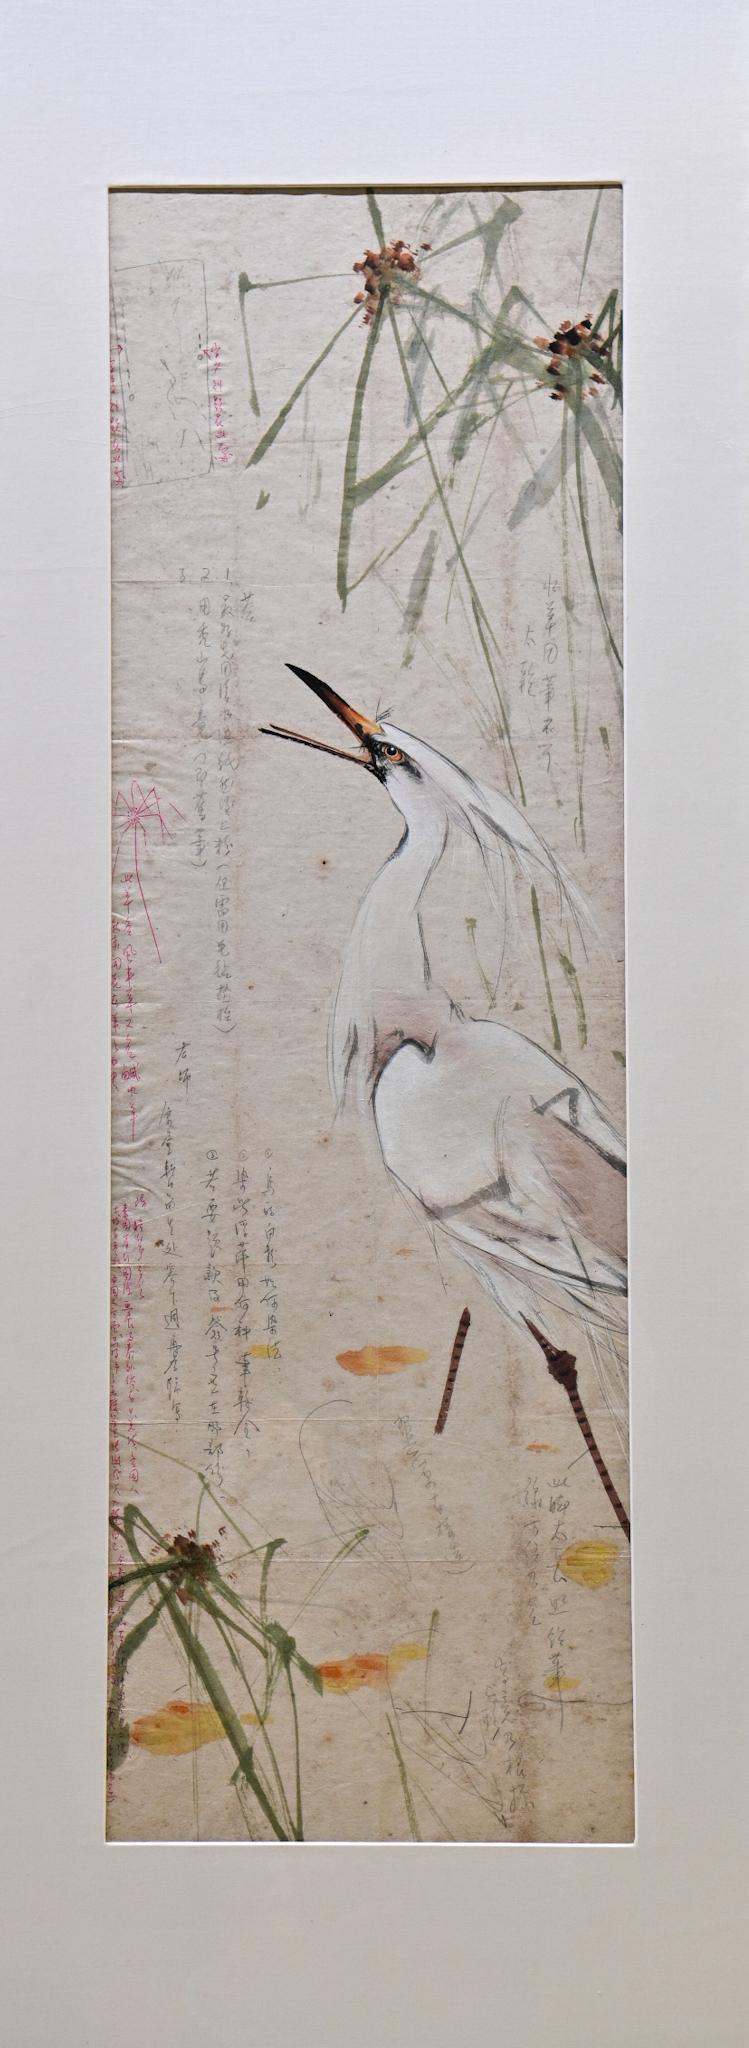 The exhibition "From a Distance: Art Dialogues between Chao Shao-an and Chin Kee" will be open to the public from tomorrow (September 21) at the Hong Kong Heritage Museum. Picture shows Chin Kee's painting assignment "Egret", with questions and answers between Chao Shao-an and Chin.